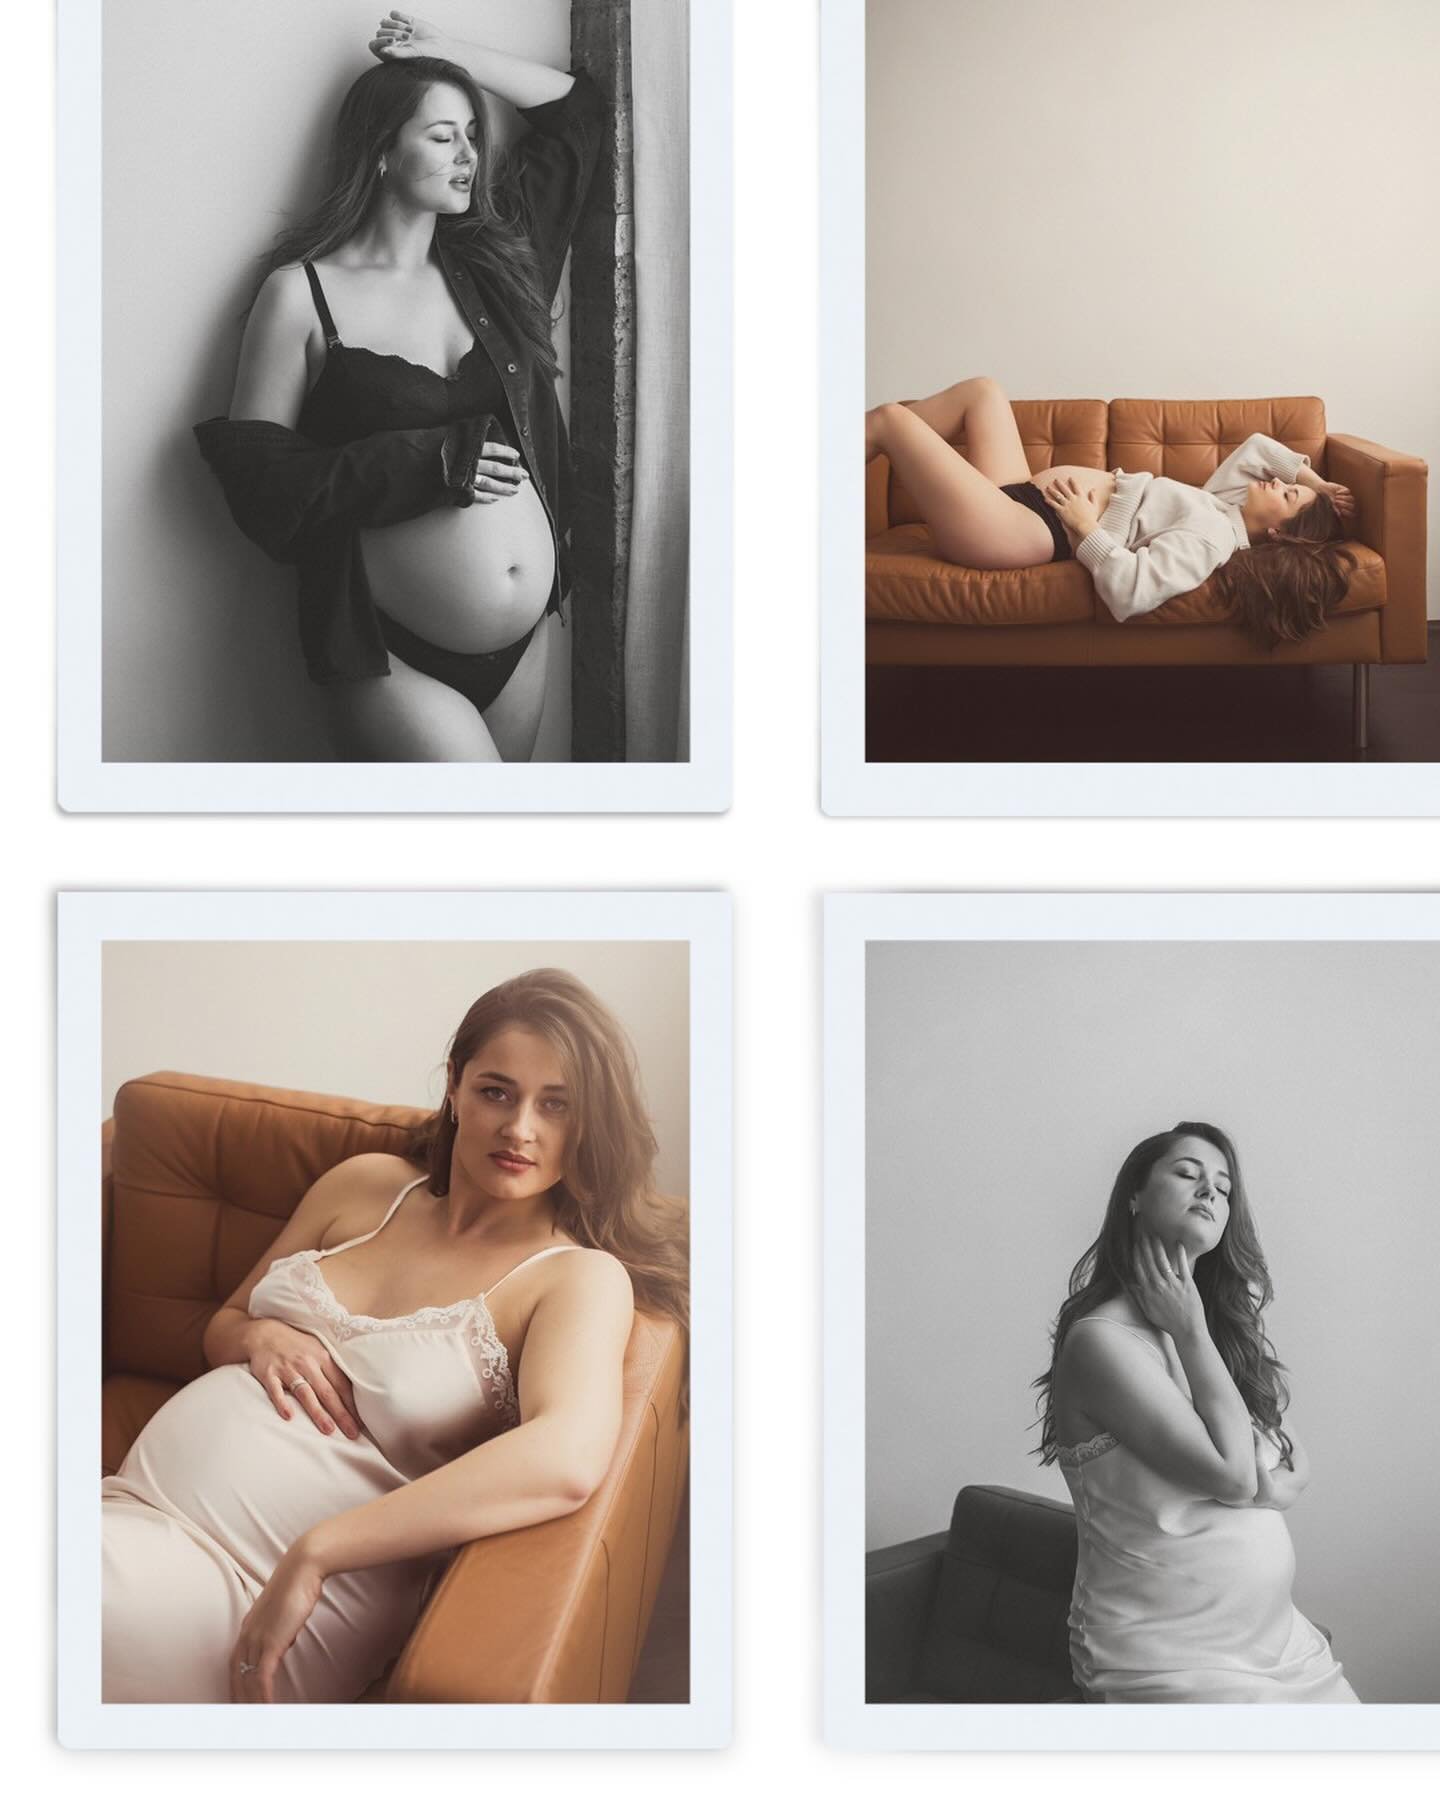 28 weeks never looked so good ❤️&zwj;🔥

When you get to document the pregnancy of a fellow photographer friend, she knows to trust the process and commit to the experience. Capturing @megandaisystudio as she approached her 3rd trimester was an absol